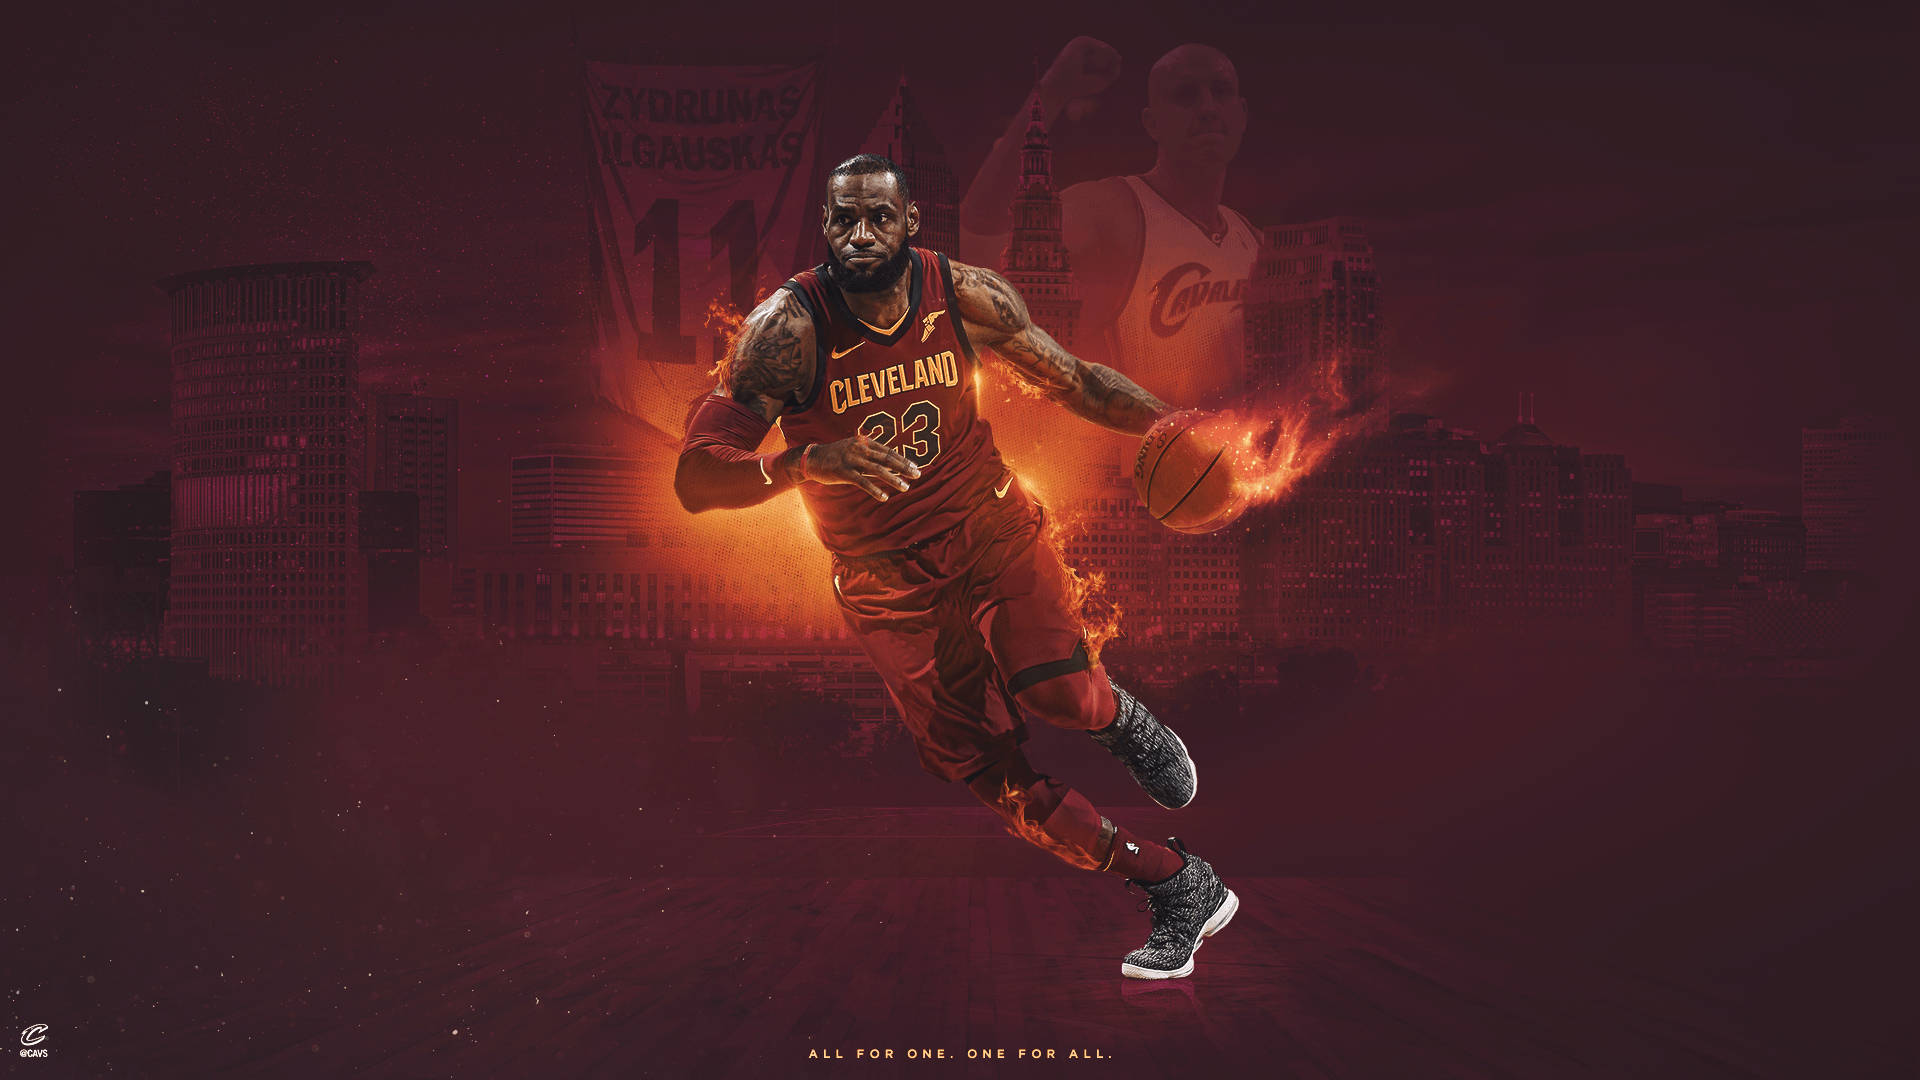 Lebron James-nba's All For One, One For All Background